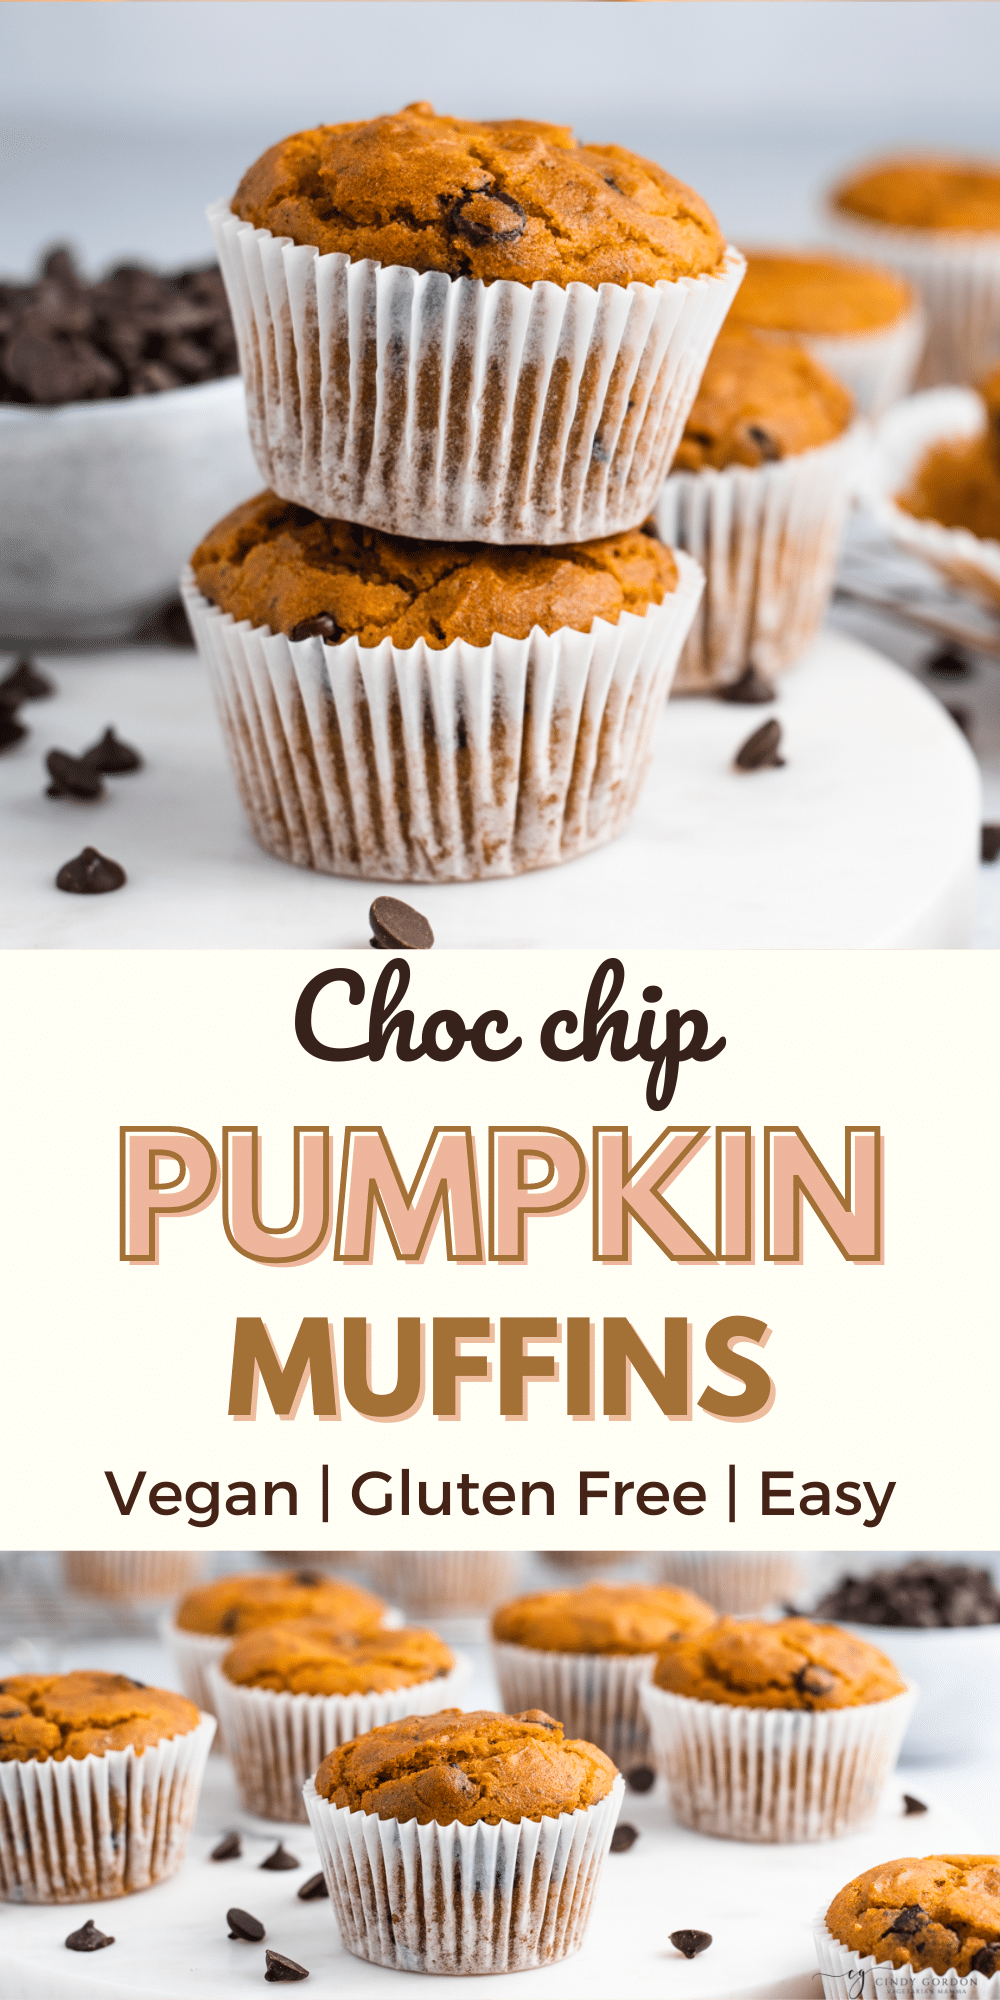 Have a craving for some pumpkin spice goodness plus some chocolate? I have you covered with this easy recipe for Vegan Pumpkin Chocolate Chip Muffins! #pumpkinmuffins #veganmuffins